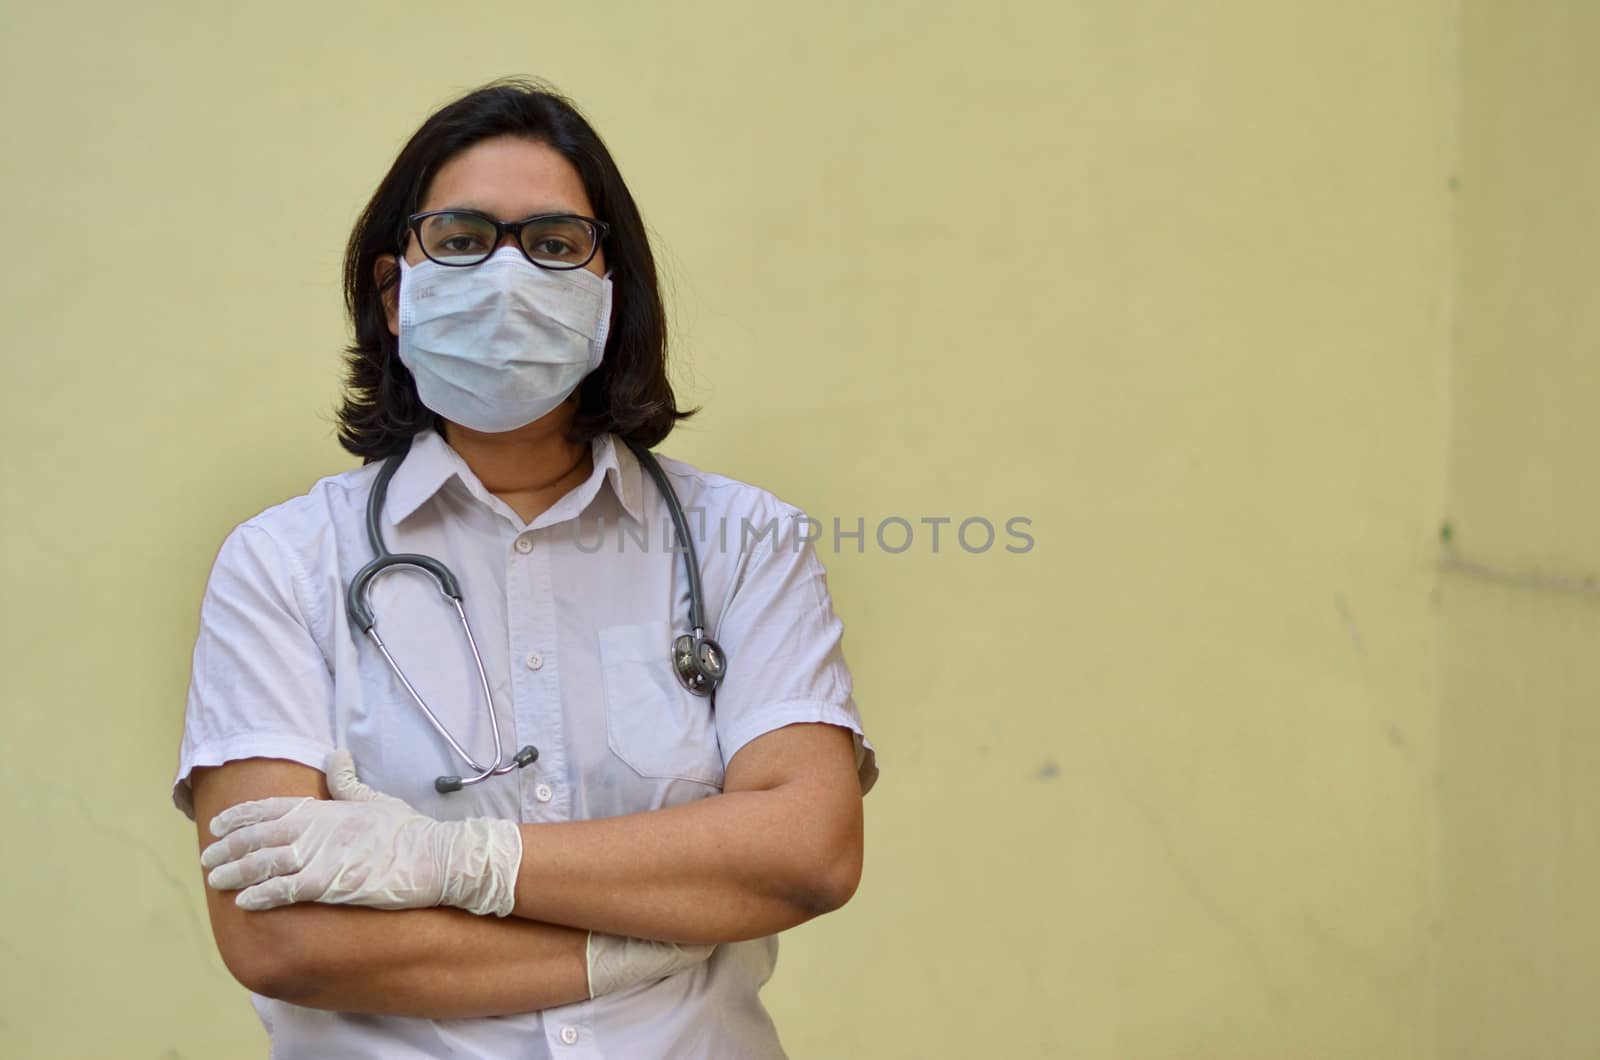 Portrait of a young medical healthcare female worker with hands crossed / folded, wearing surgical mask to protect herself from Corona Virus (COVID-19) pandemic disease against yellow background